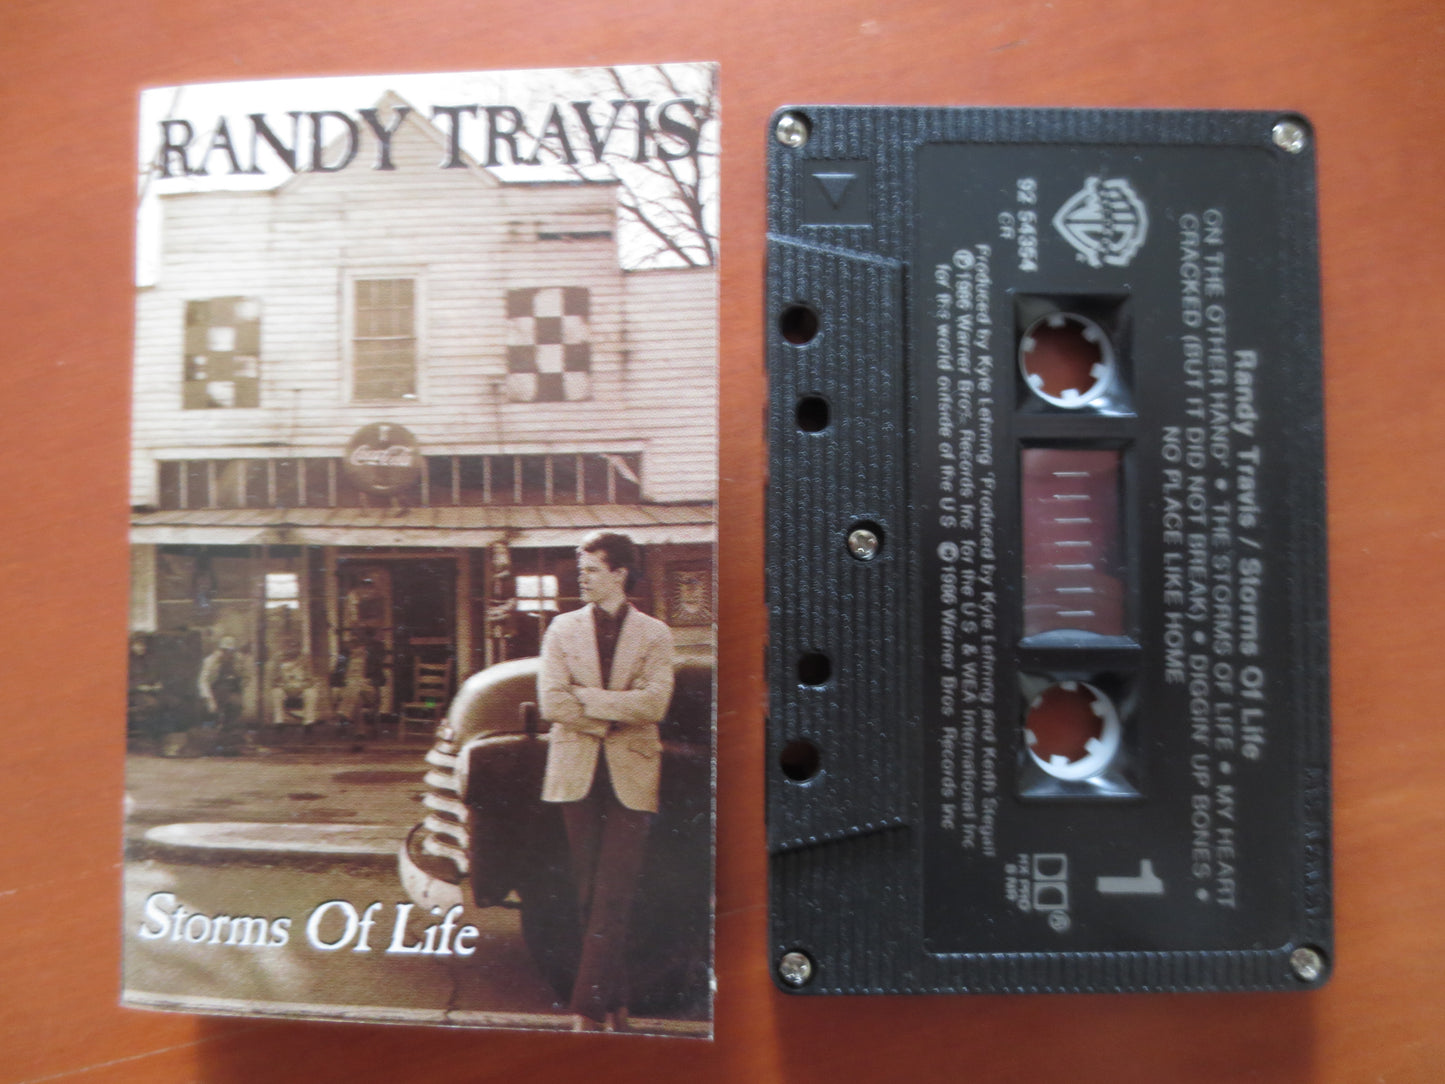 RANDY TRAVIS, Storms of LIFE, Country Tape, Randy Travis Lp, Tape Cassette, Country Cassette, Pop Cassette, 1986 Cassette